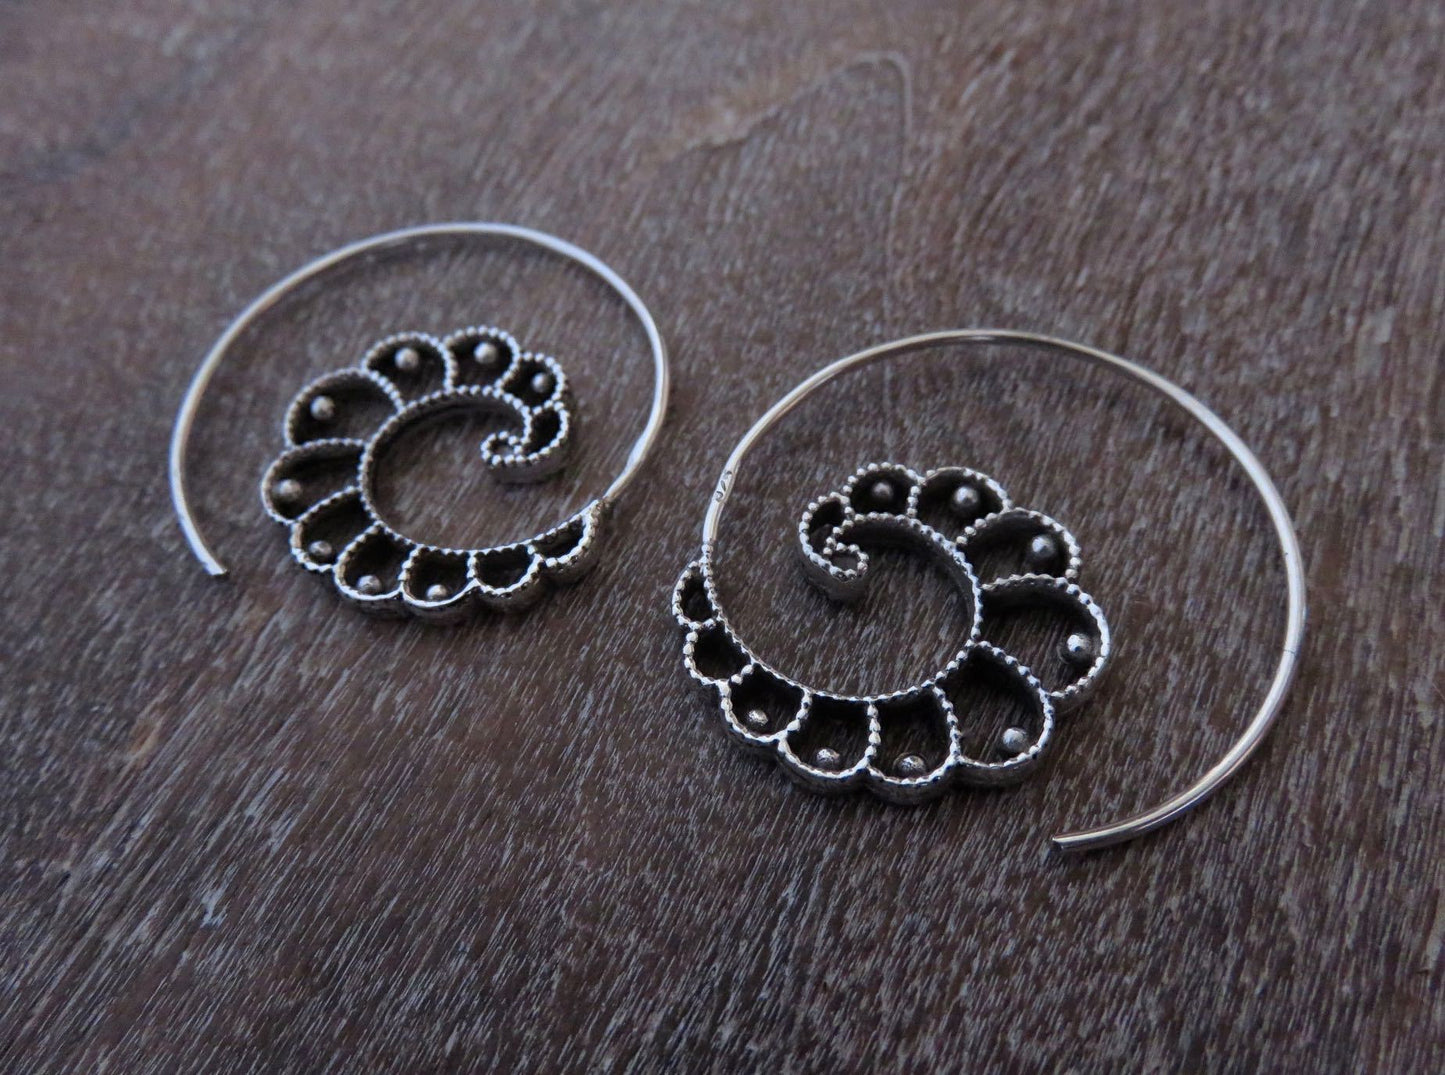 Spiral earrings with dot pattern made of silver 